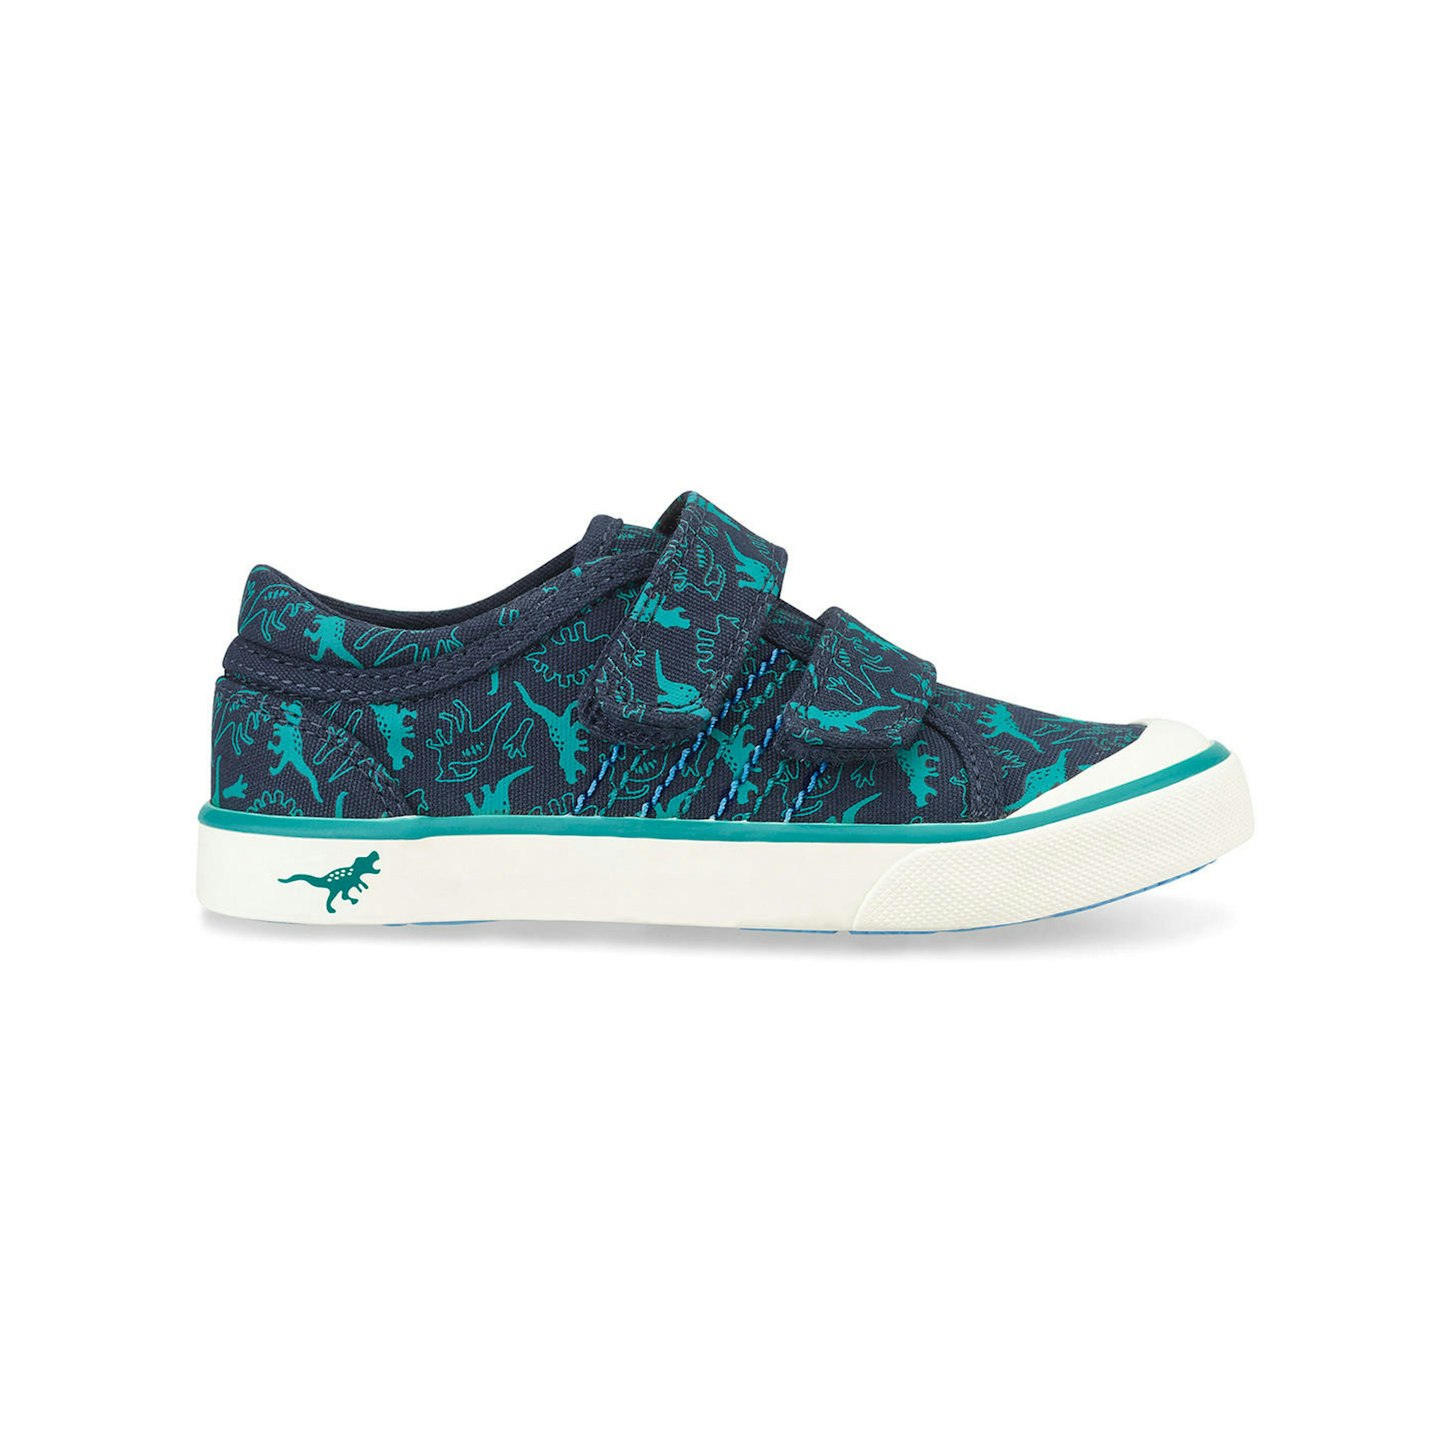 Navy blue dino print canvas shoes baby's first shoes